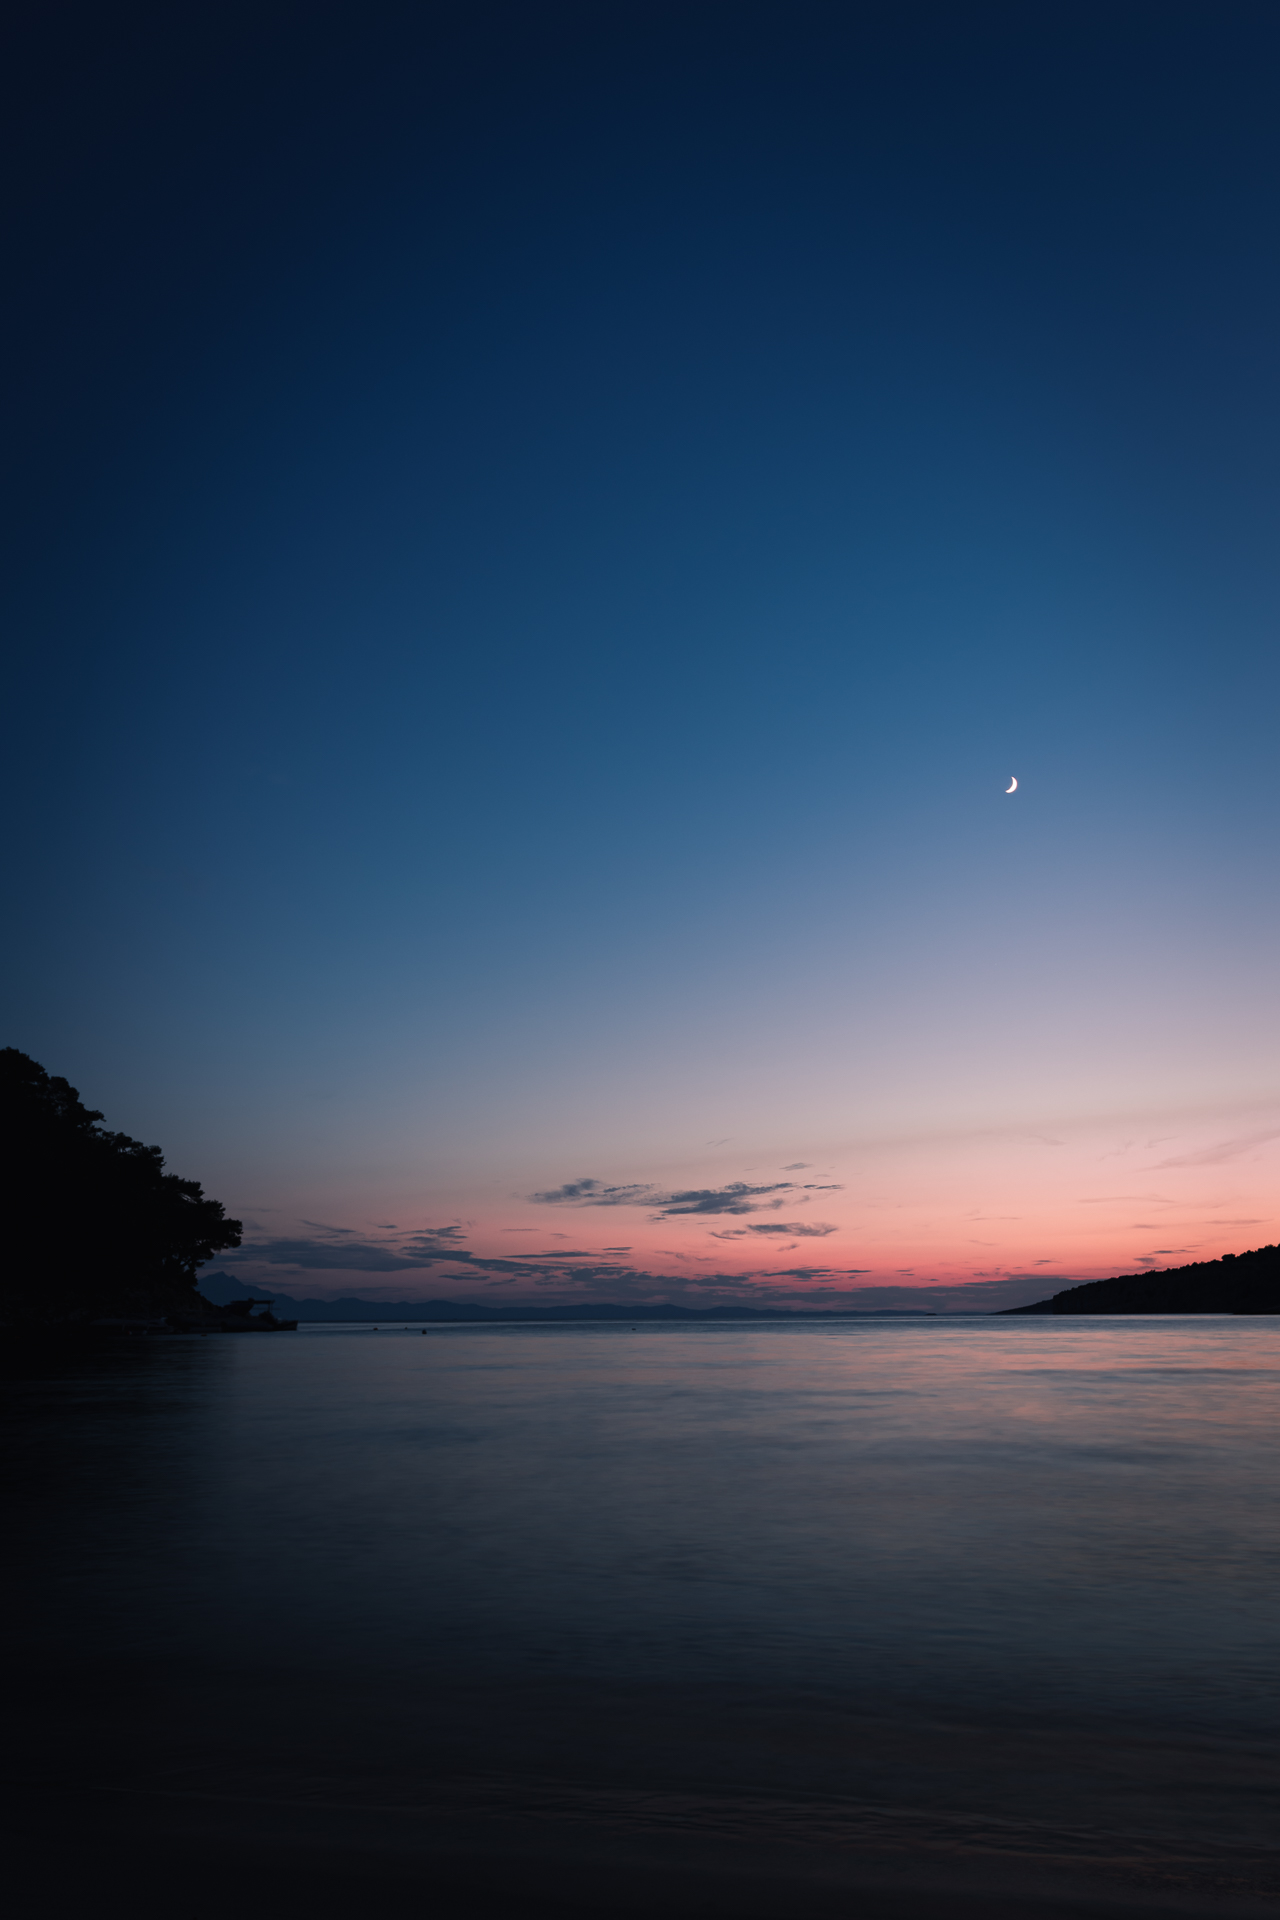 Photo of a moon in a distance over a beach at night in Greece.